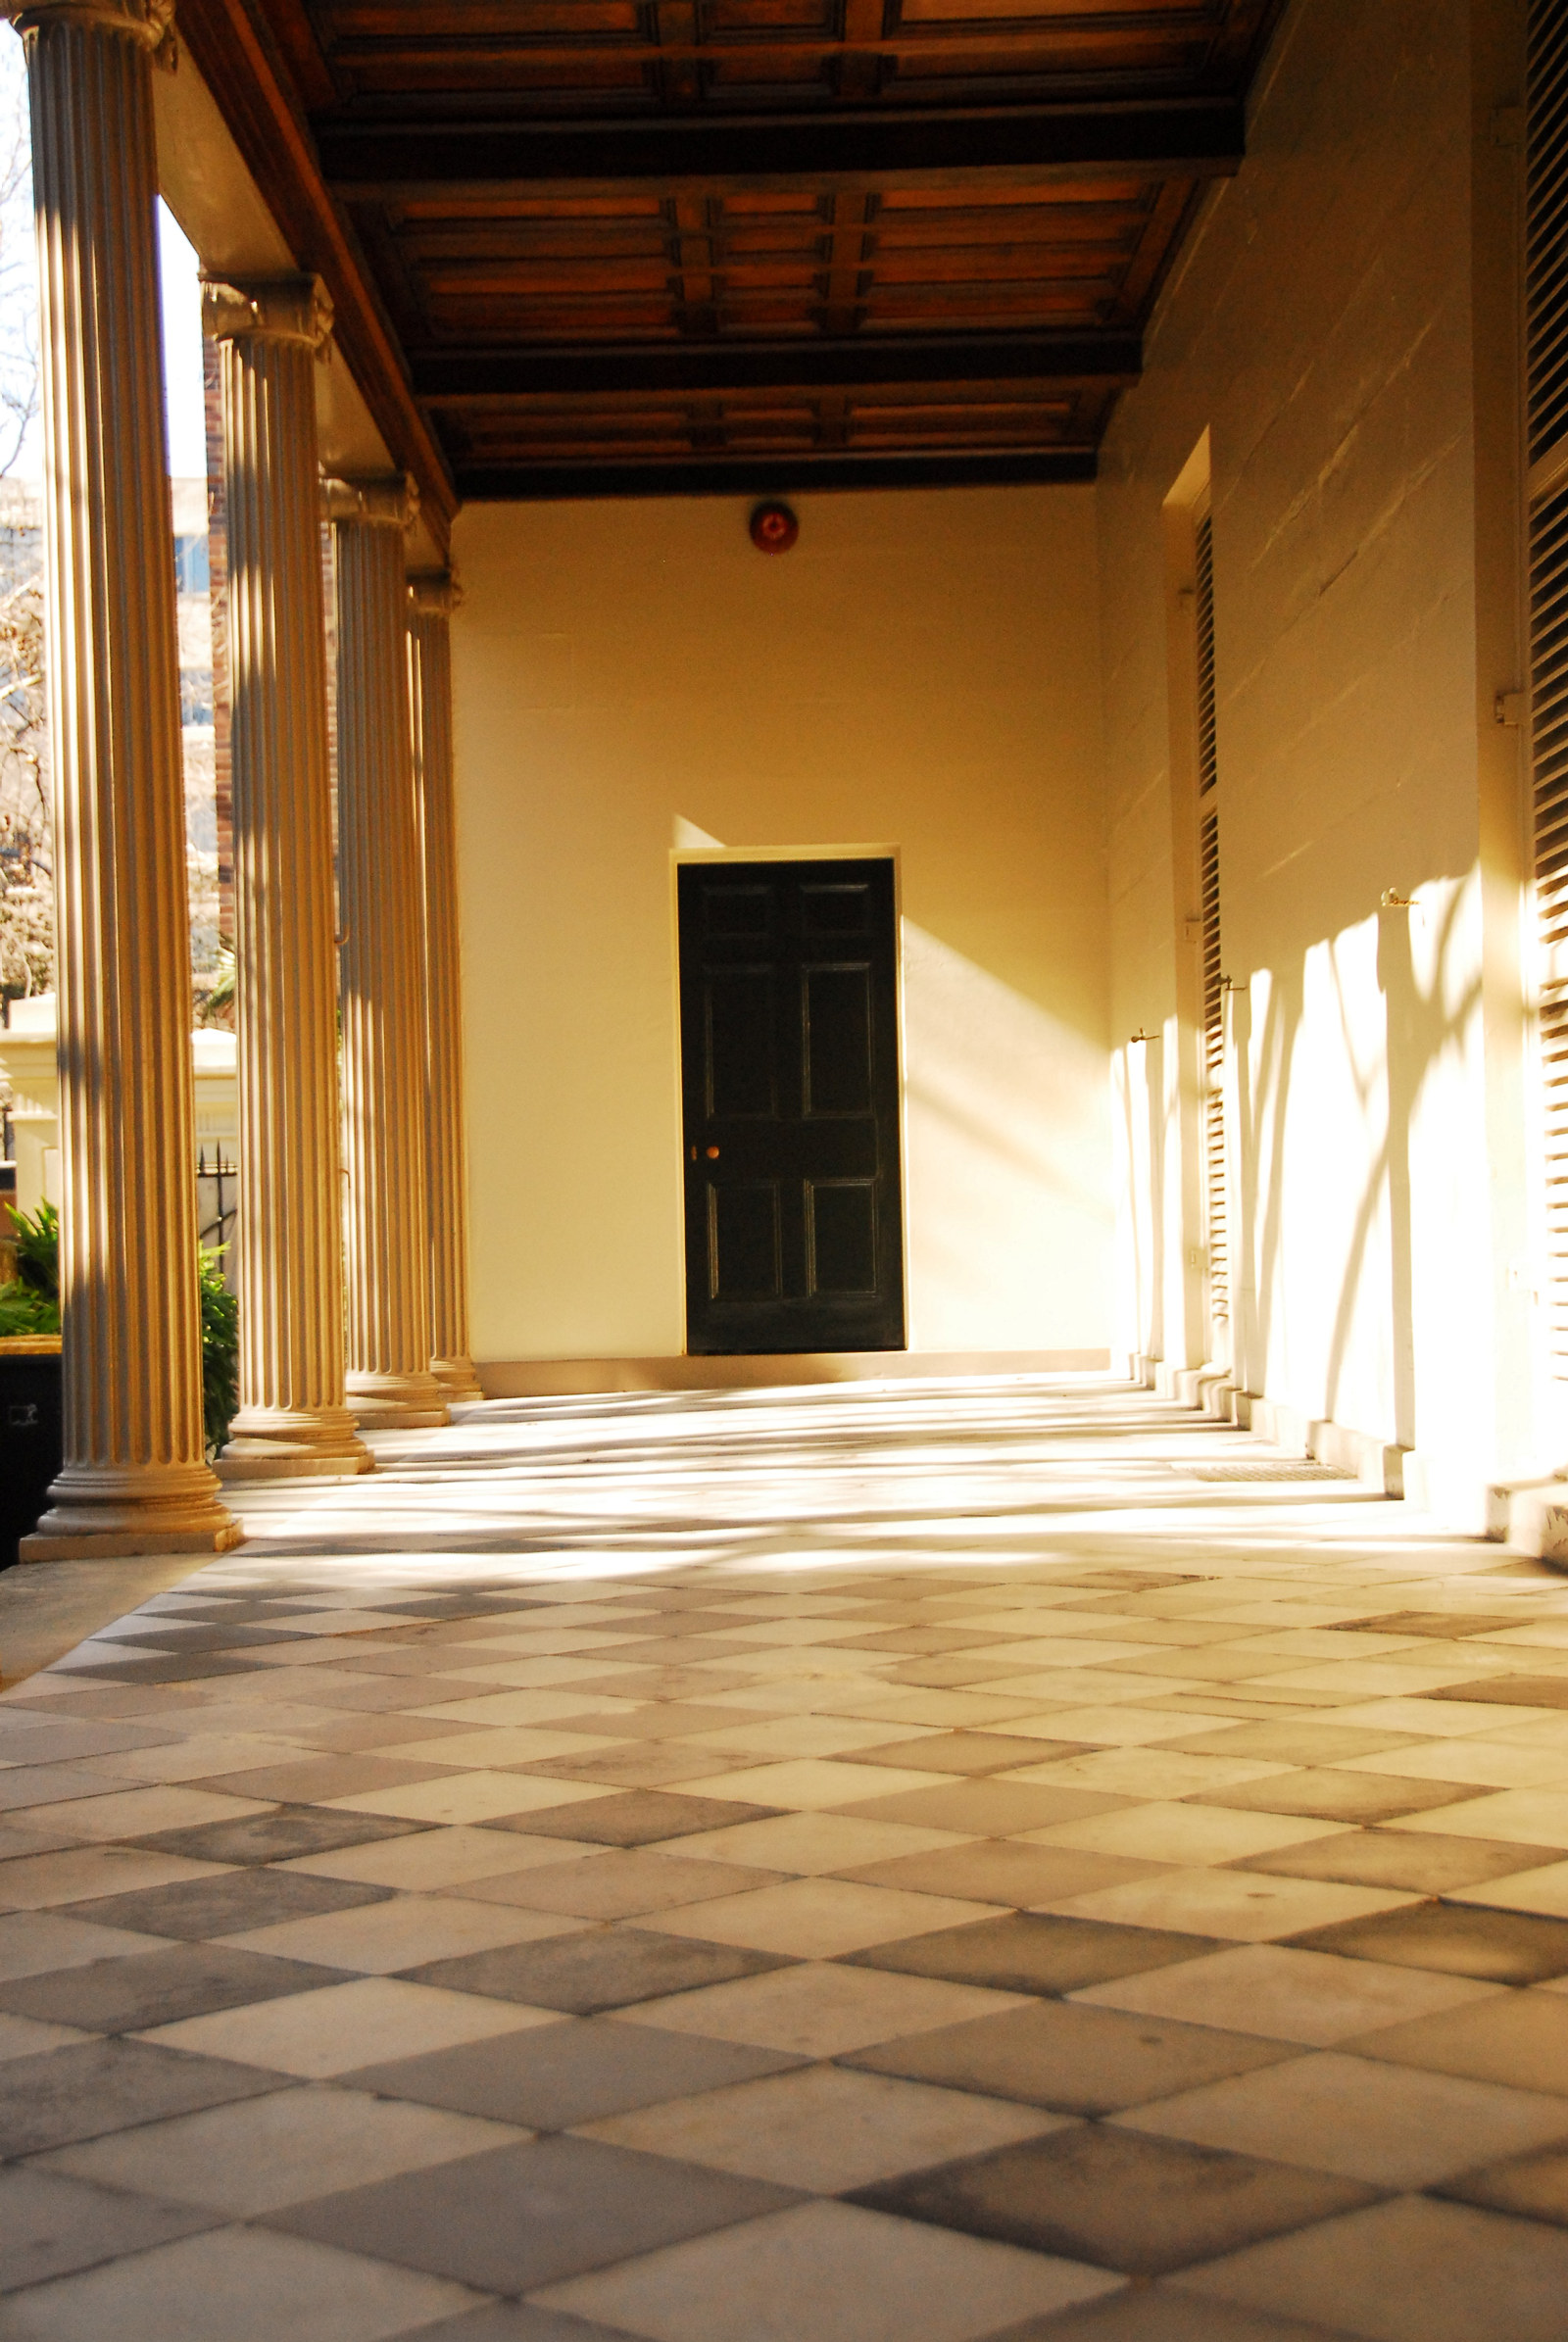 Sunlit porch area, with line of columns to left, leading up to doorway in background.